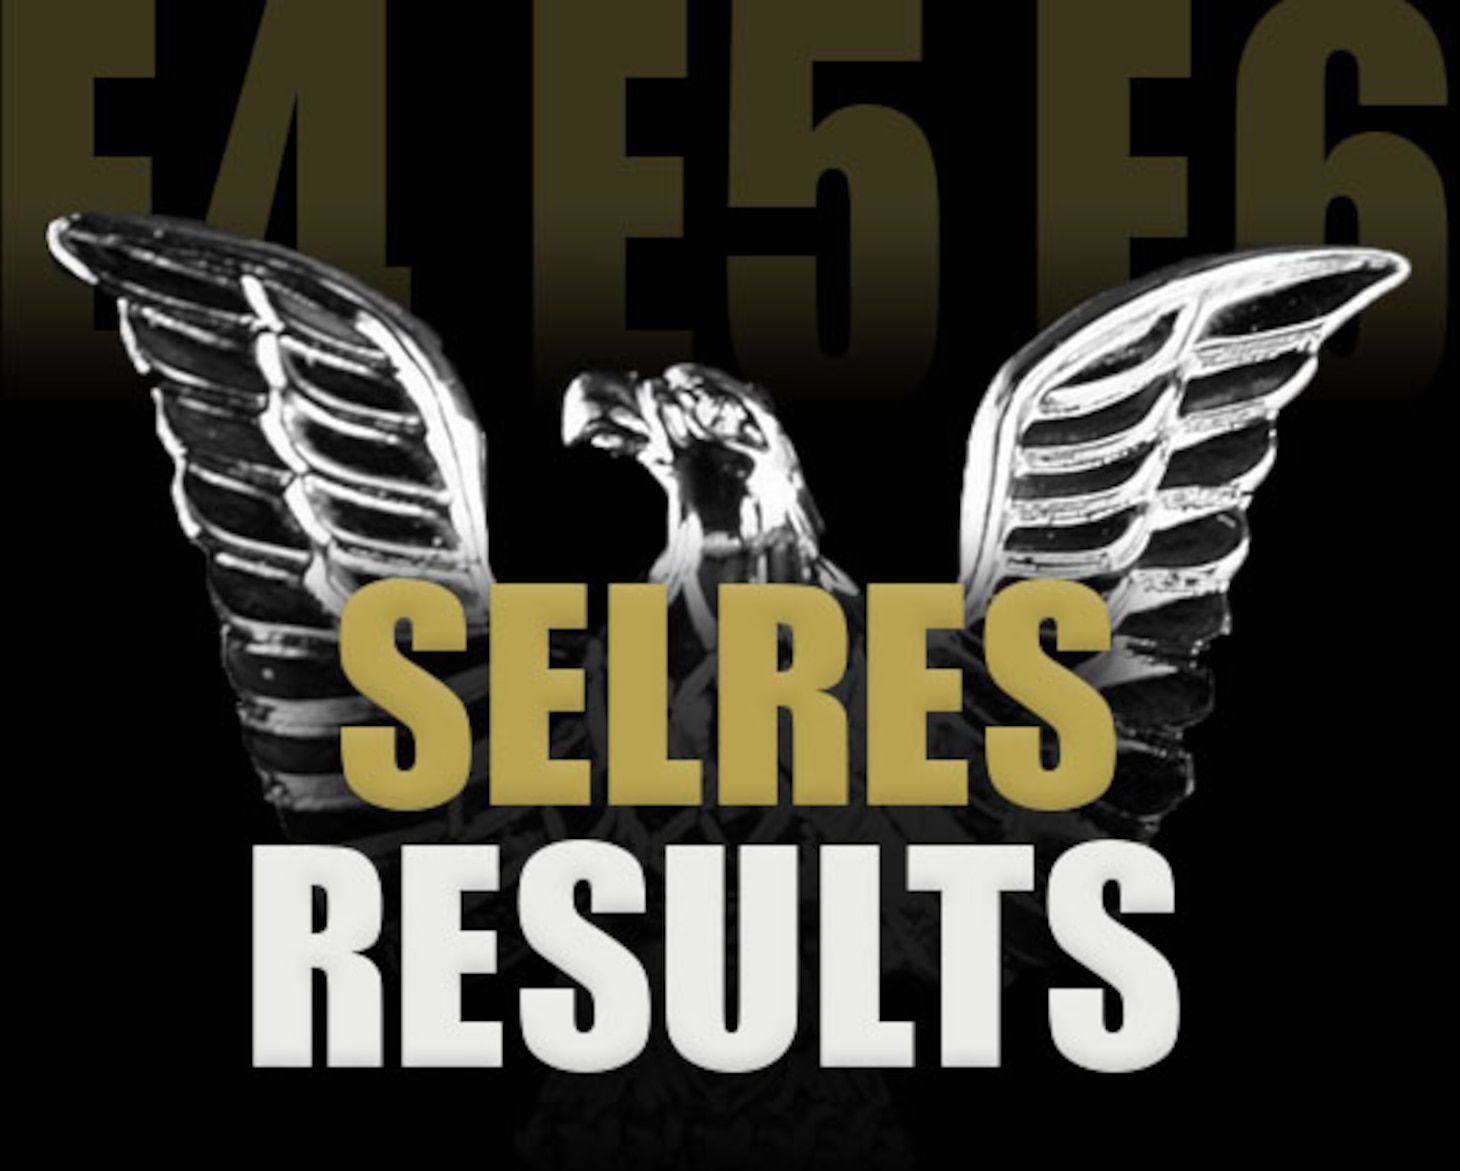 The words "E4-E6 SELRES Results" in gold on a black background with a silver chevron between them.